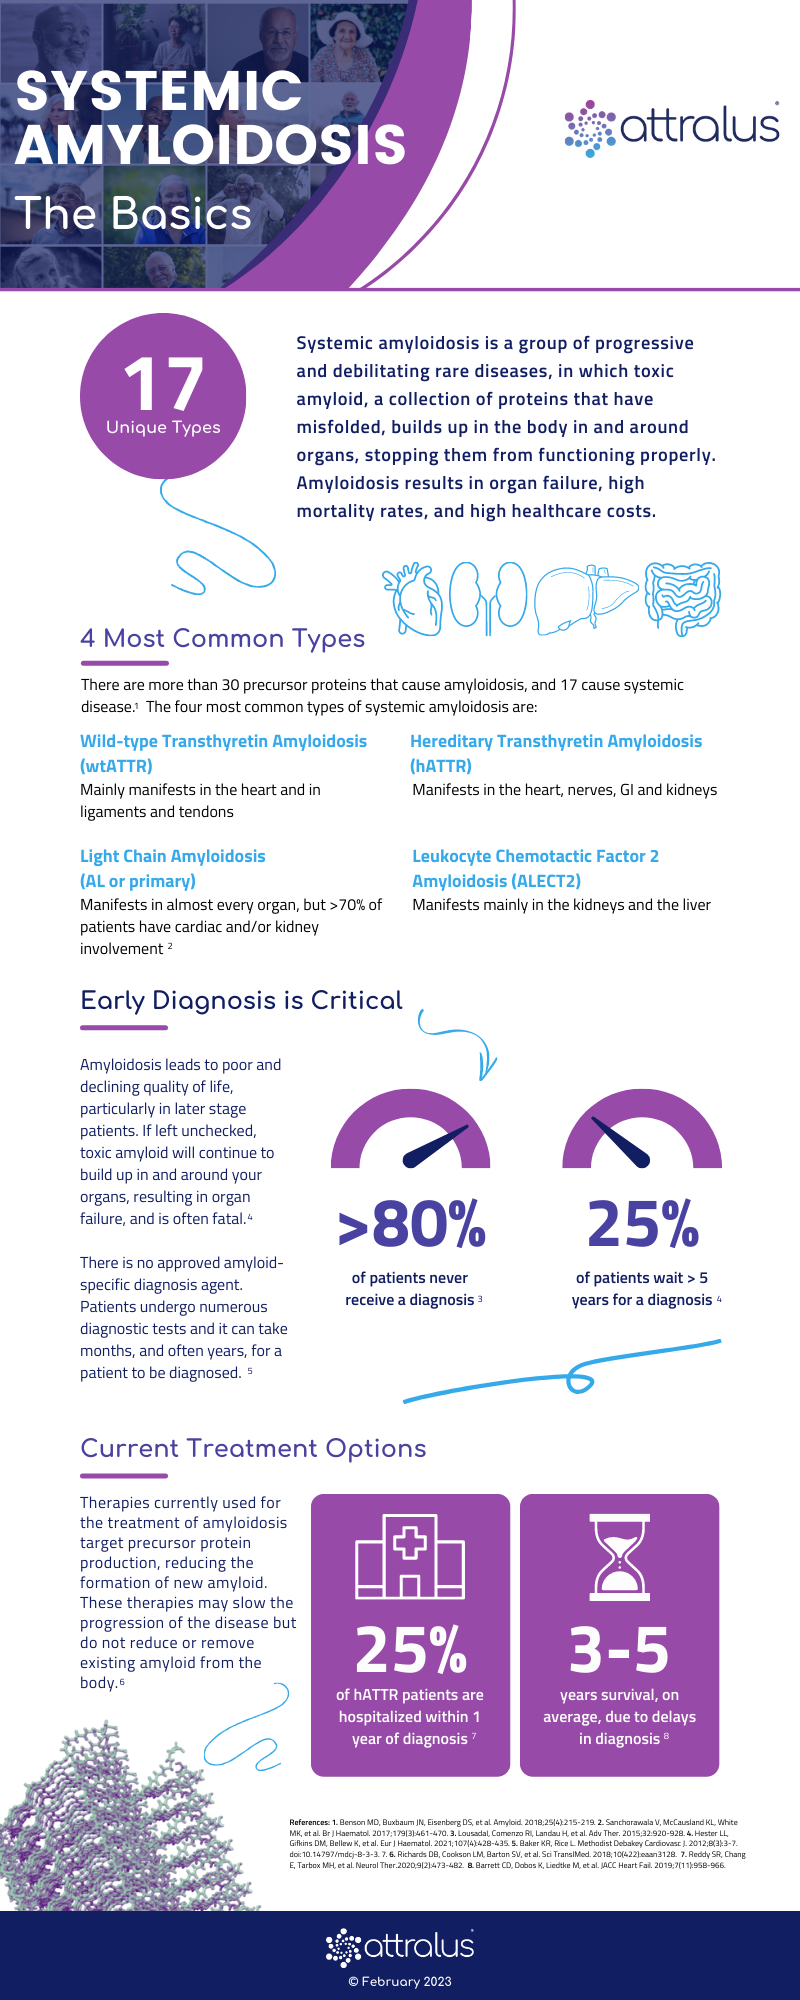 The Basics of Systemic Amyloidosis - Infographic